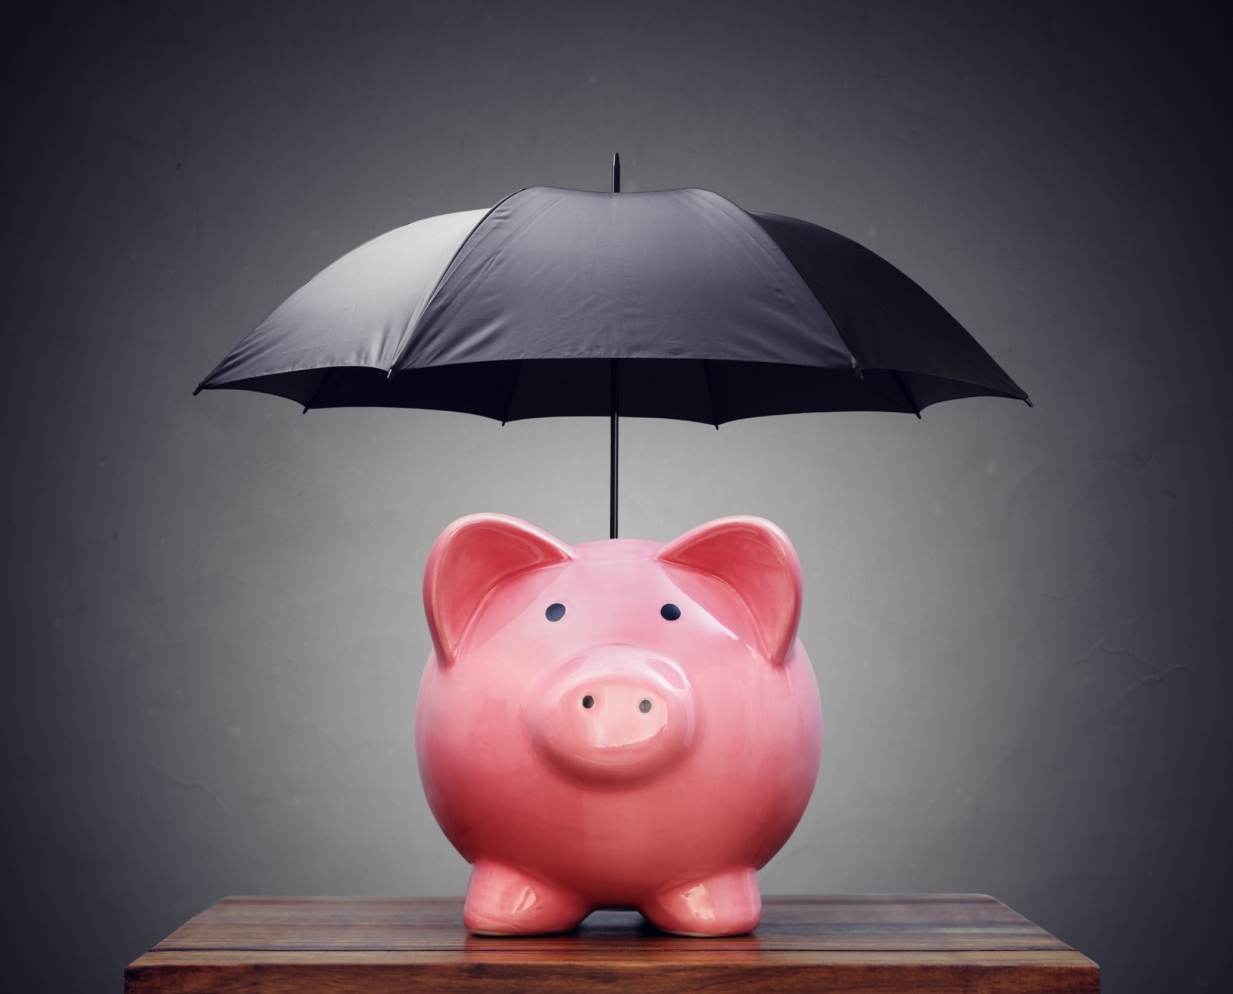 The picture shows a pink piggy bank sanding on a desk and covered by a black umbrella against a dark grey background.